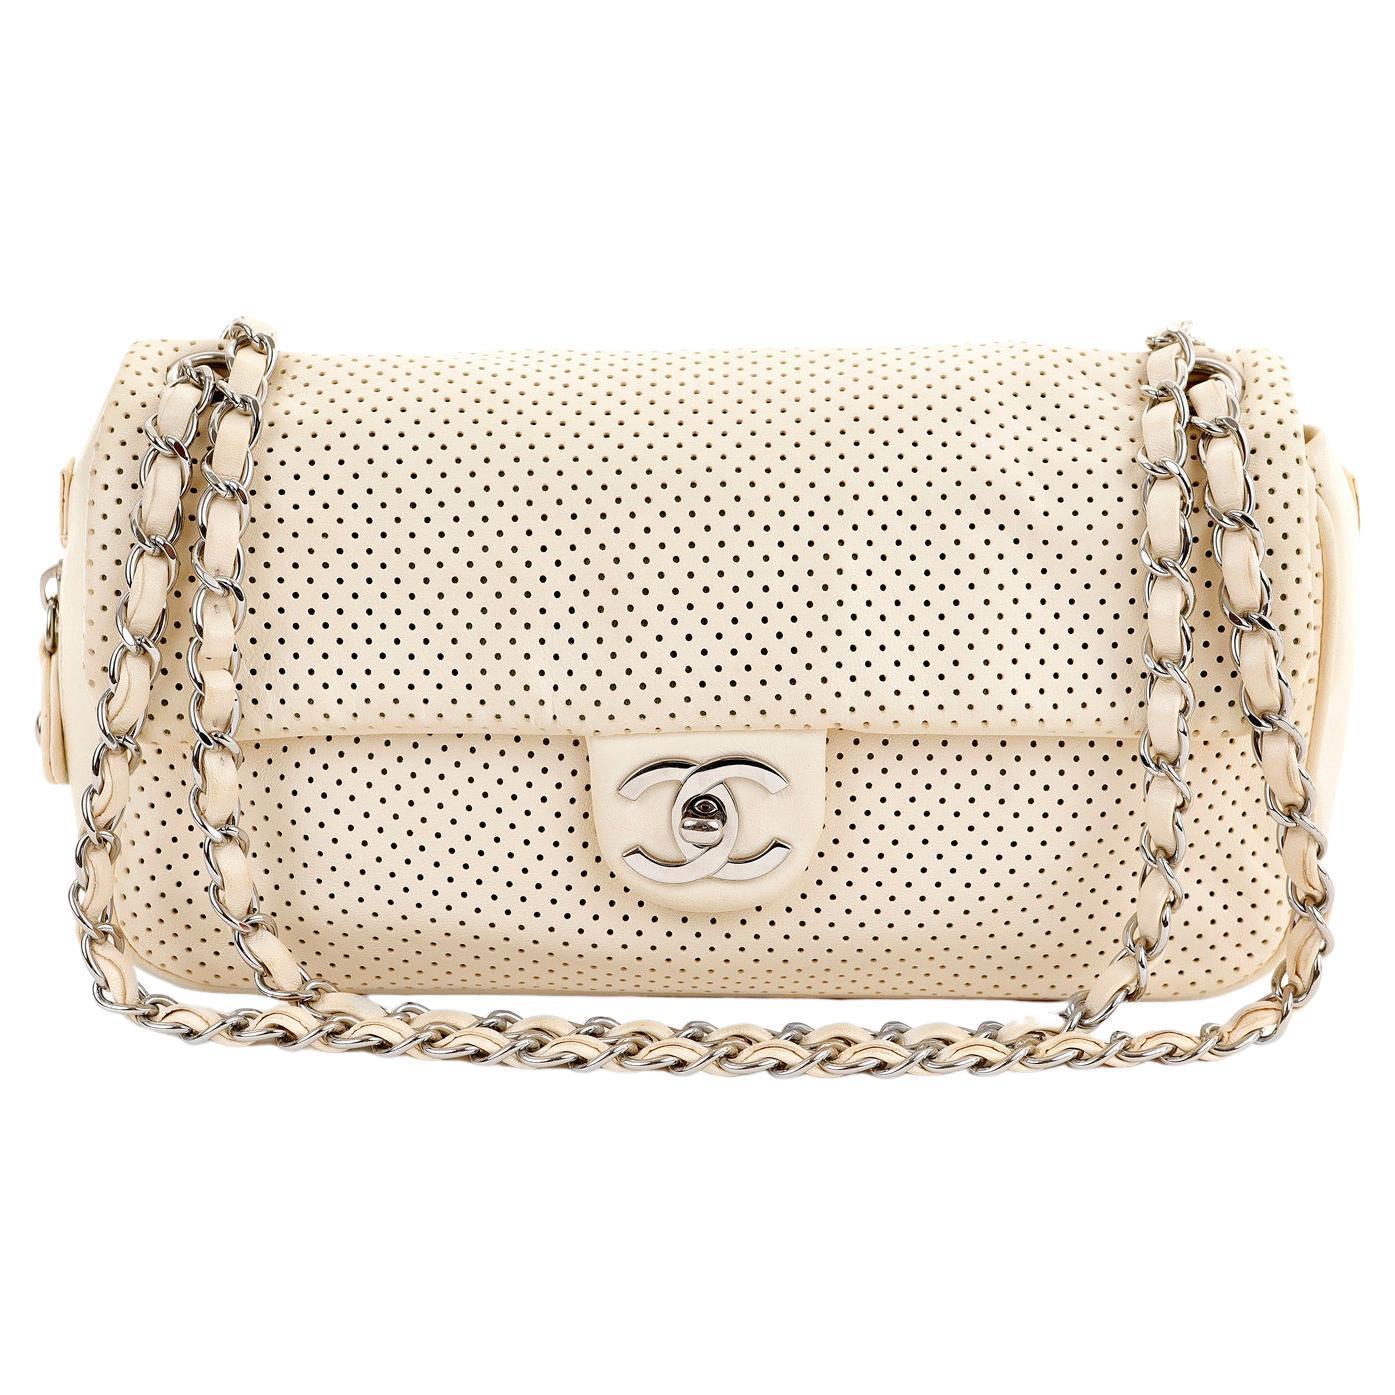 Chanel Pale Yellow Perforated Leather Baseball Spirit Flap Bag For Sale